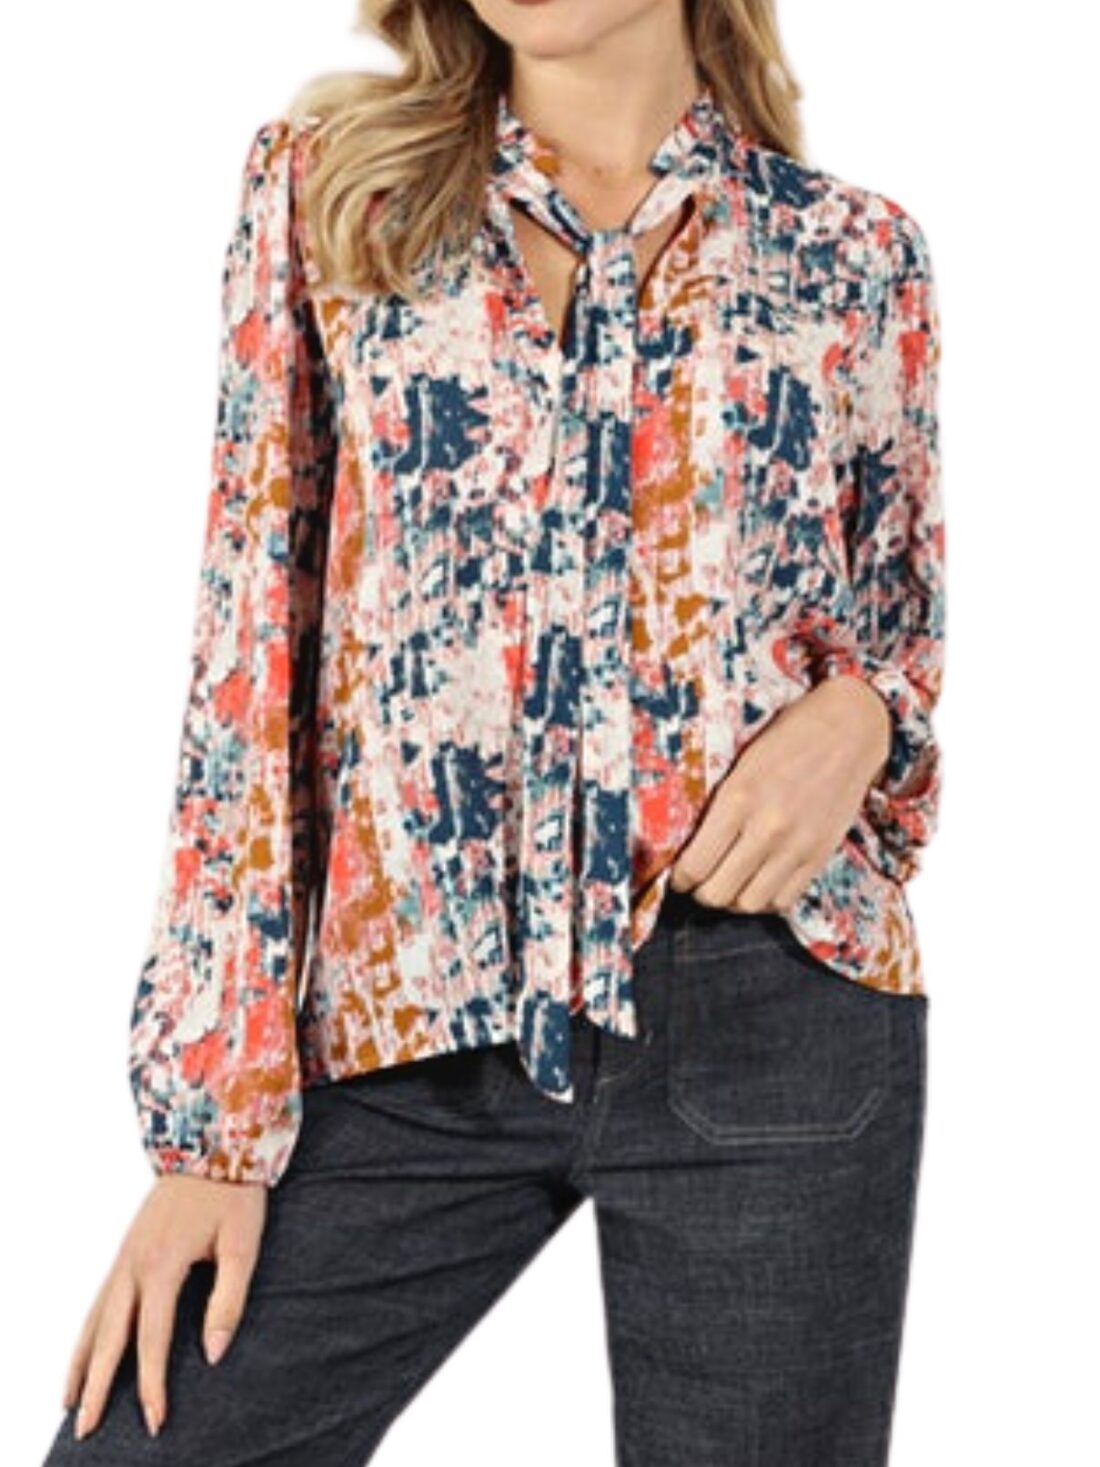 veronica m tie neck blouse in shelby print